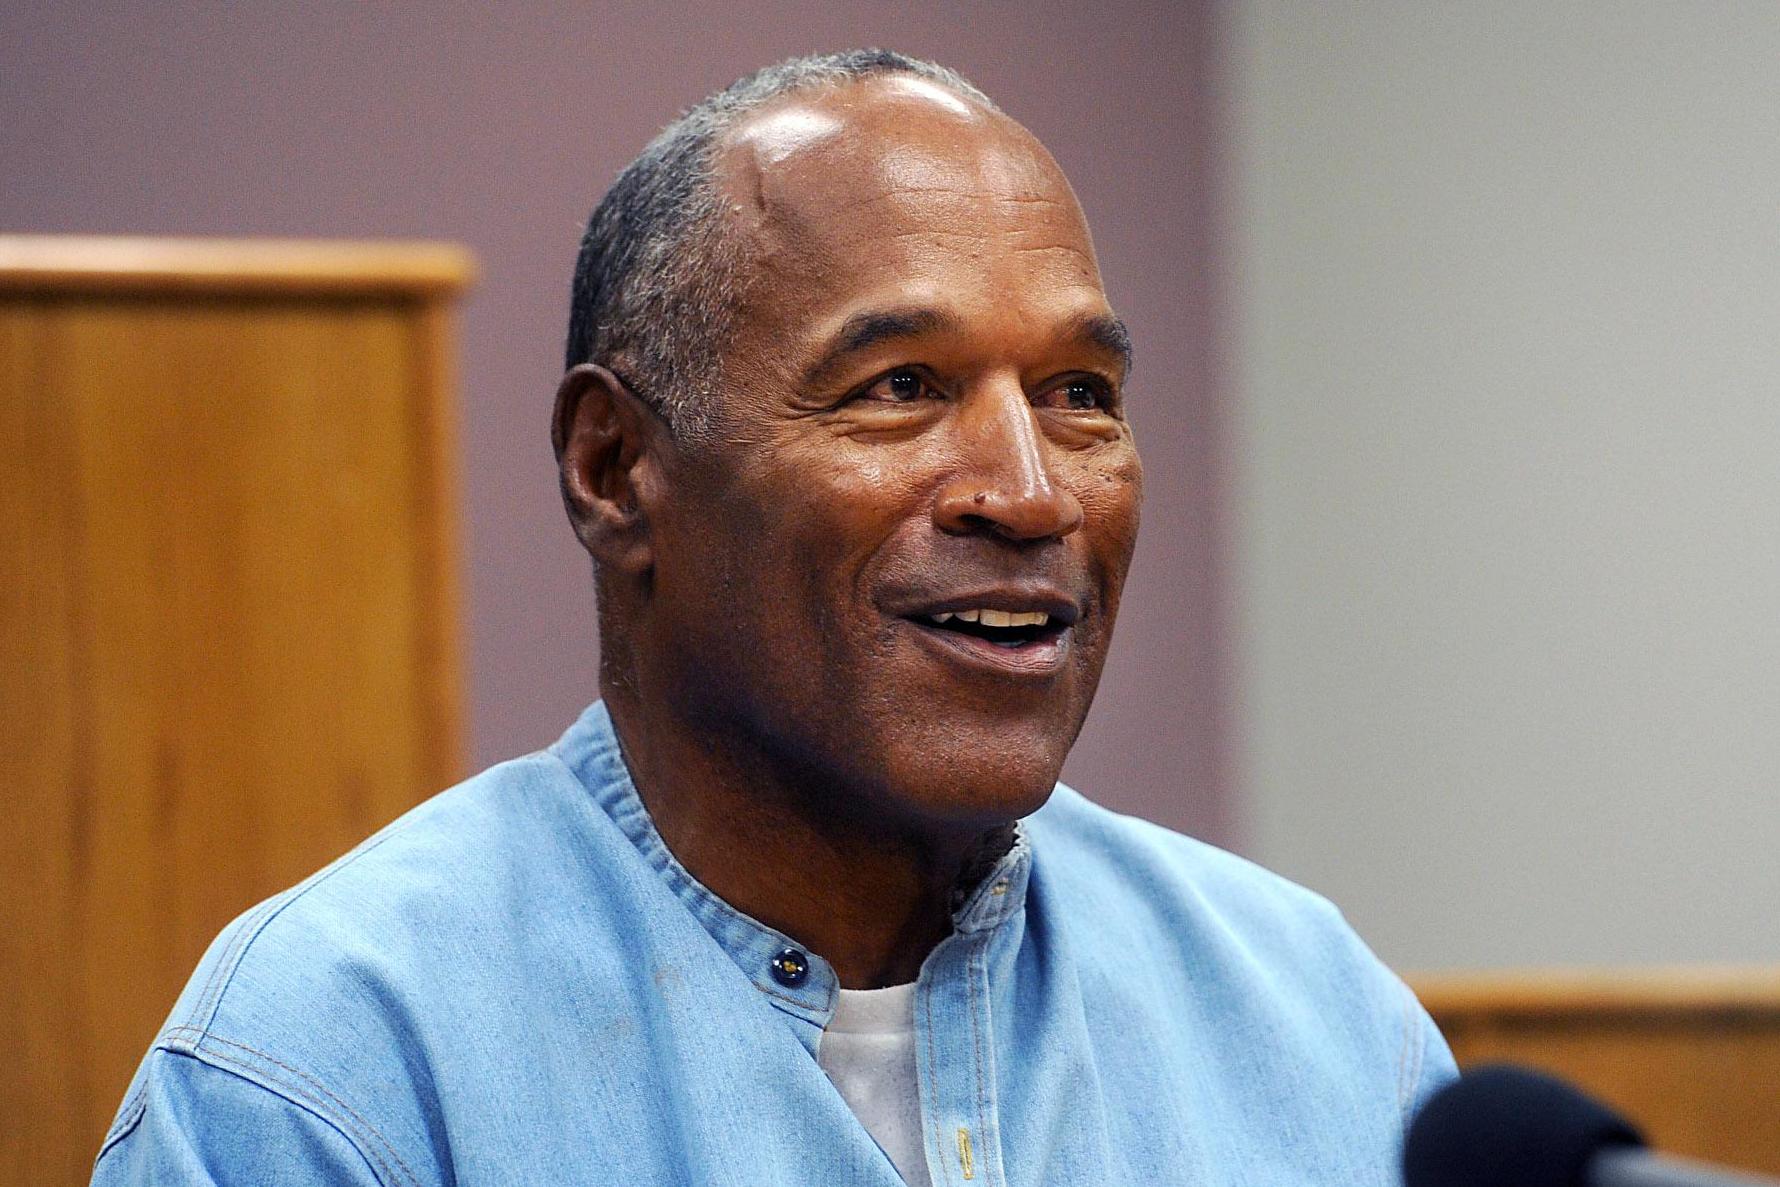 OJ Simpson during his parole hearing on 20 July 2017 in Lovelock, Nevada.